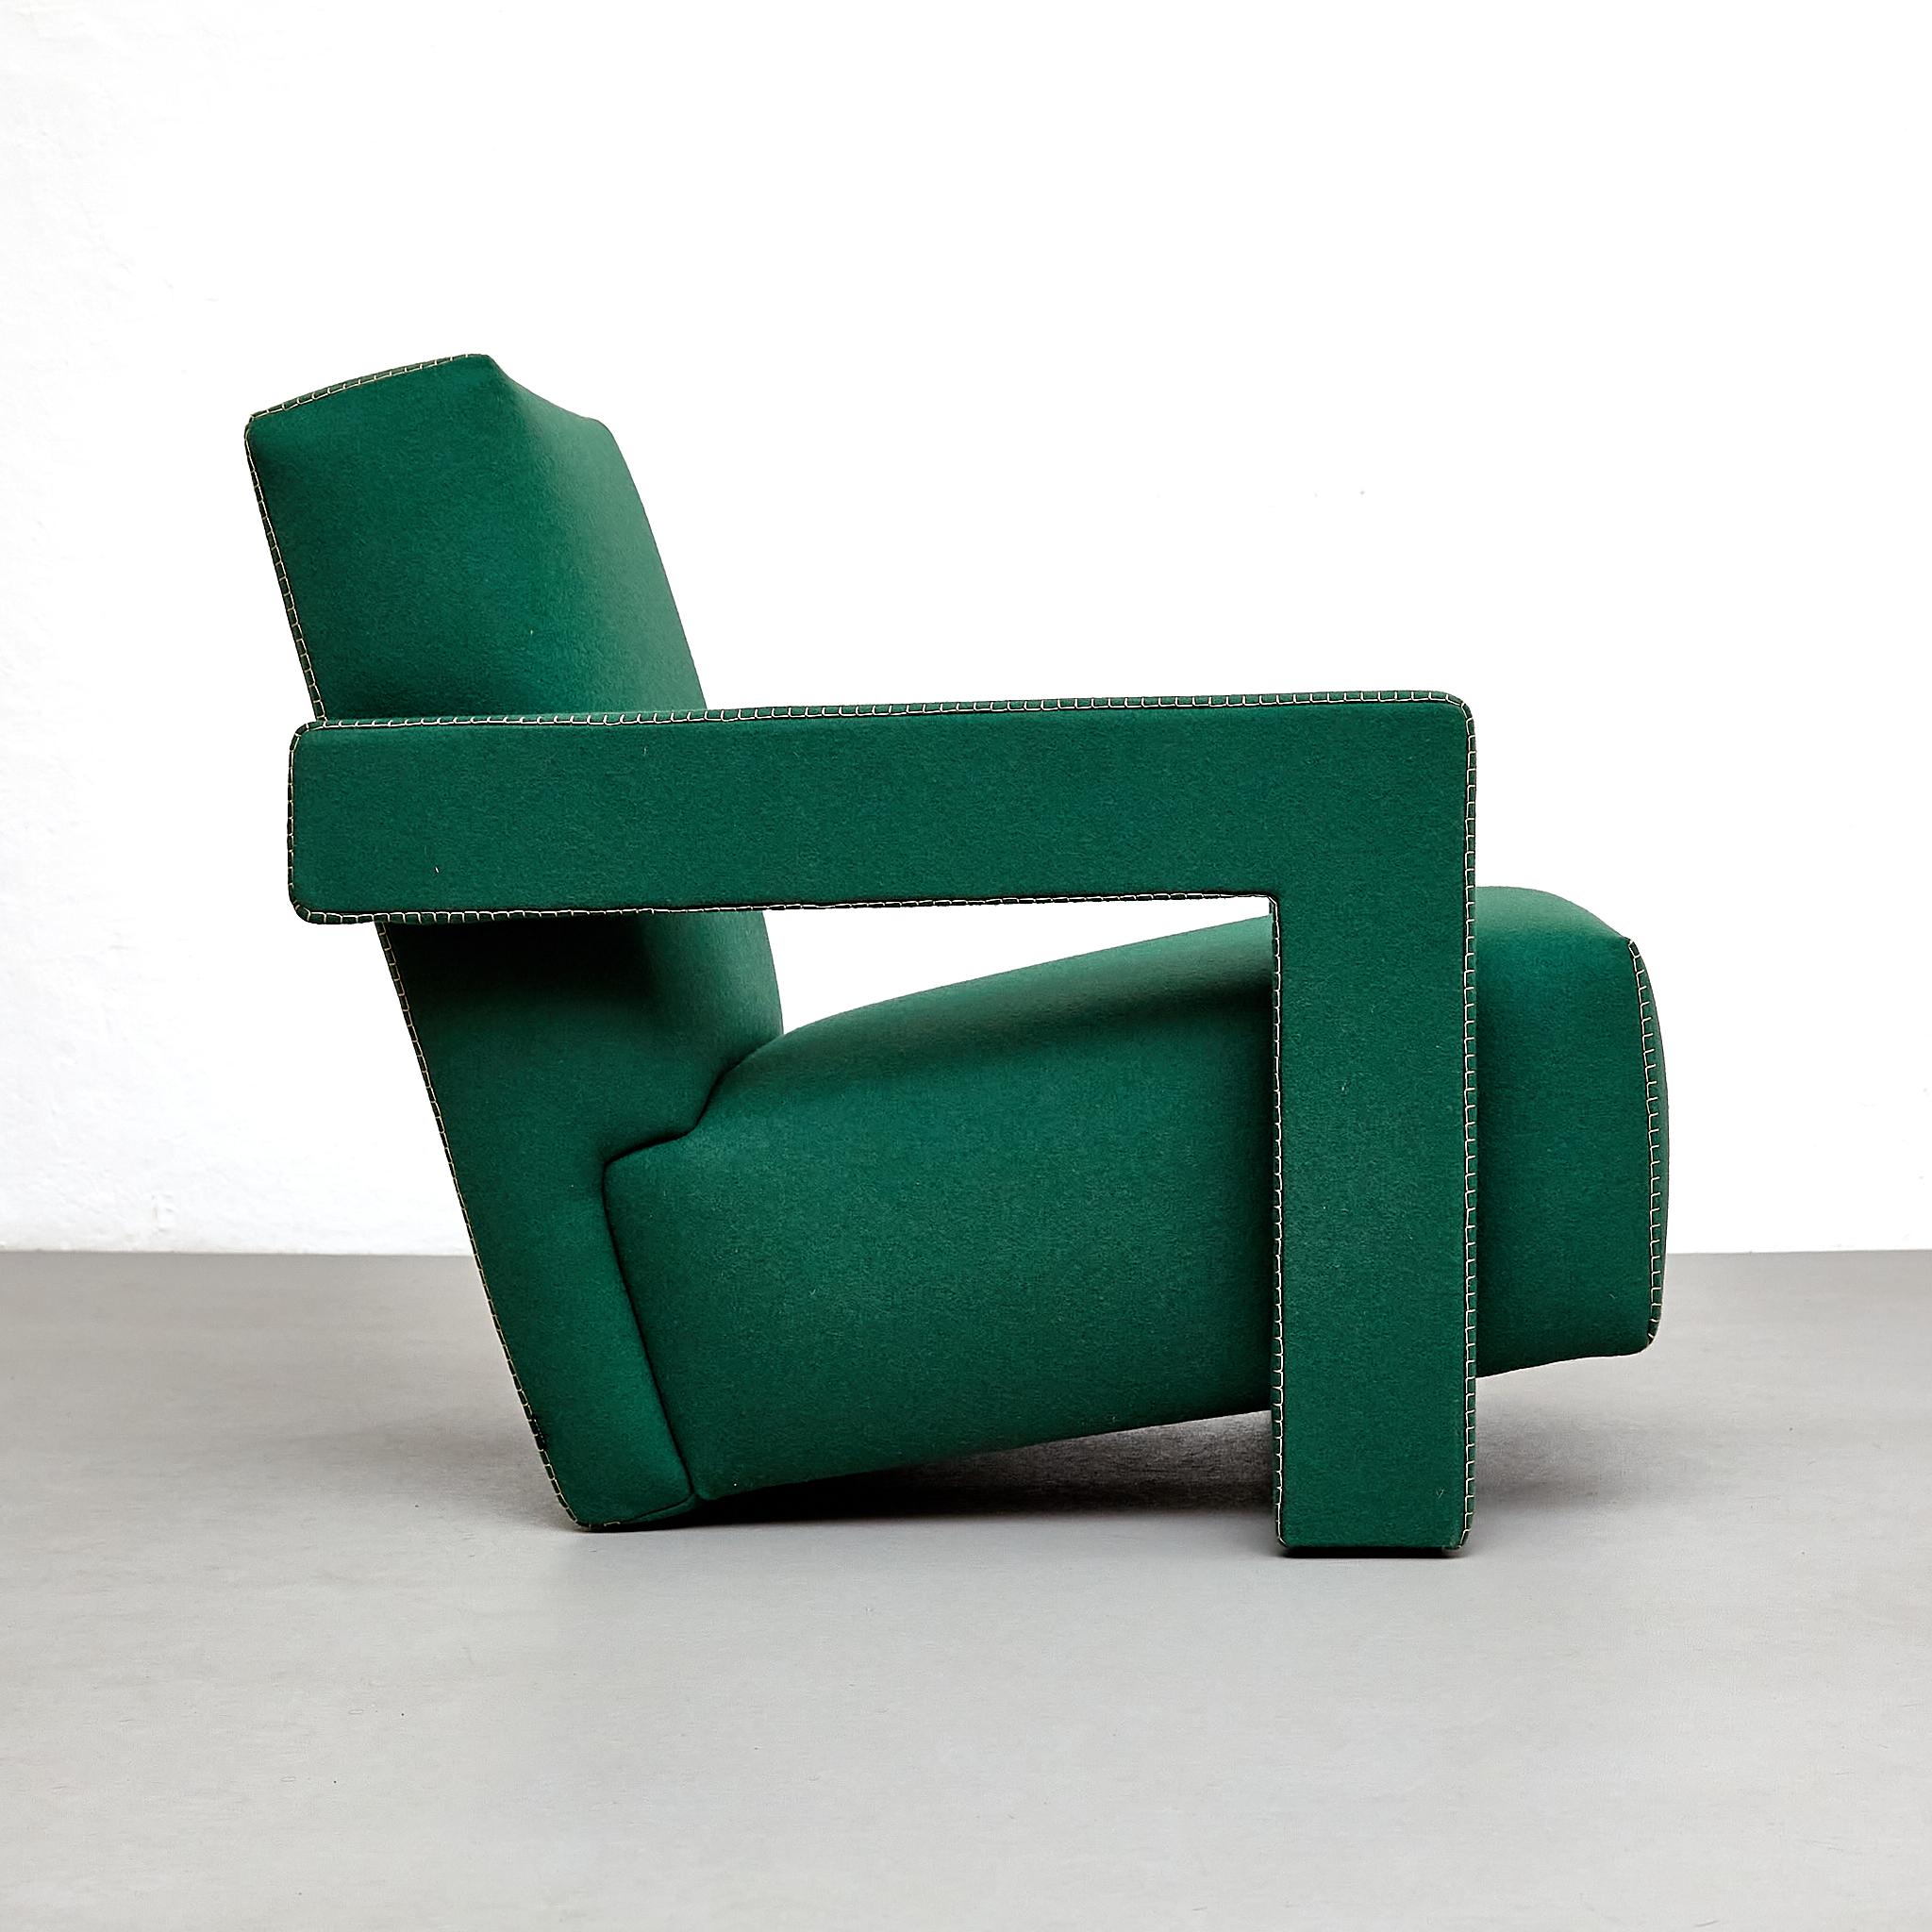 Fabric Gerrit Thomas Rietveld Utrech Armchair by Cassina For Sale